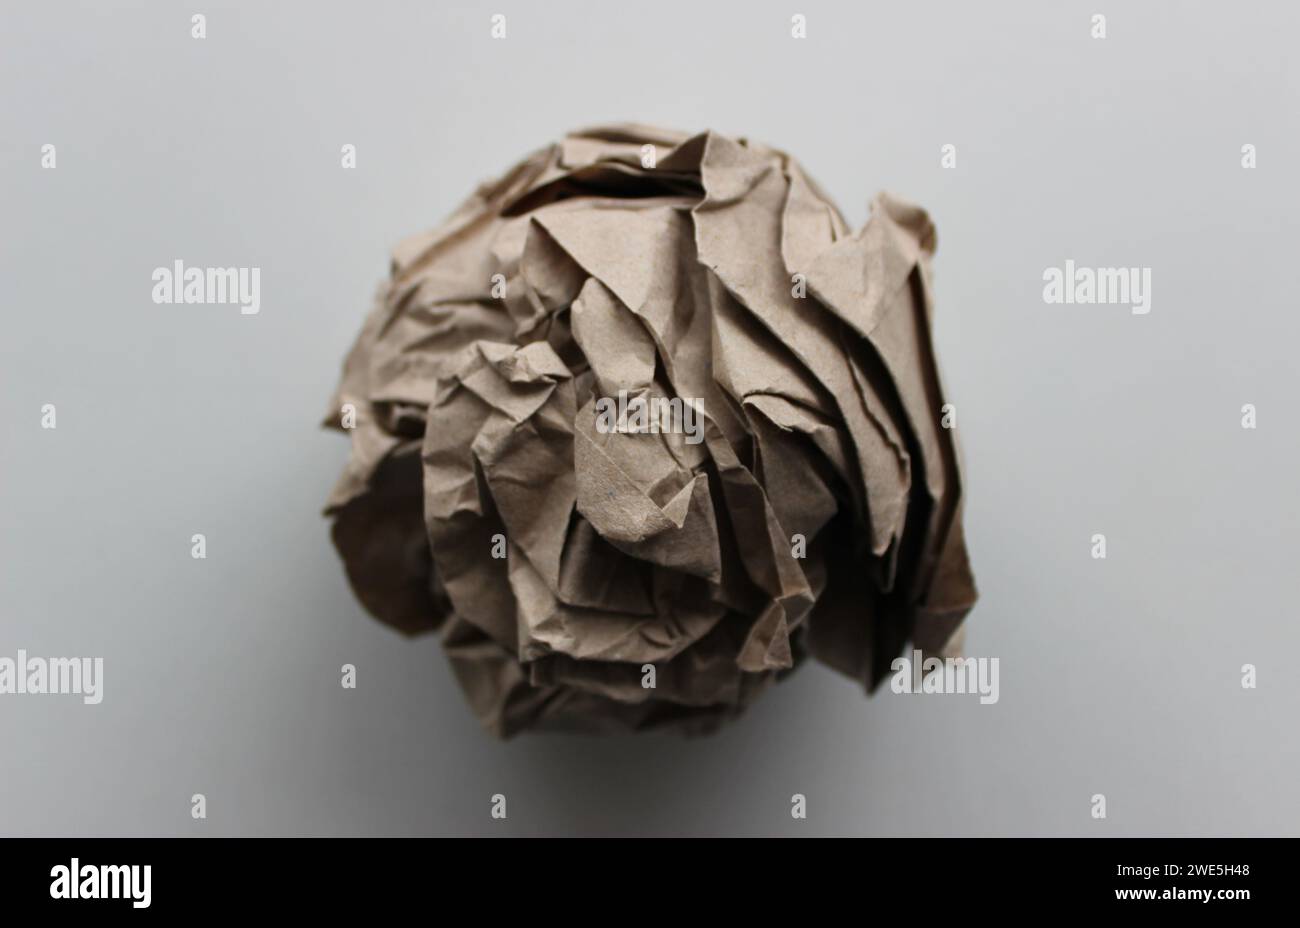 Pulp industry. Used wrapping paper ball isolated on white closeup view Stock Photo